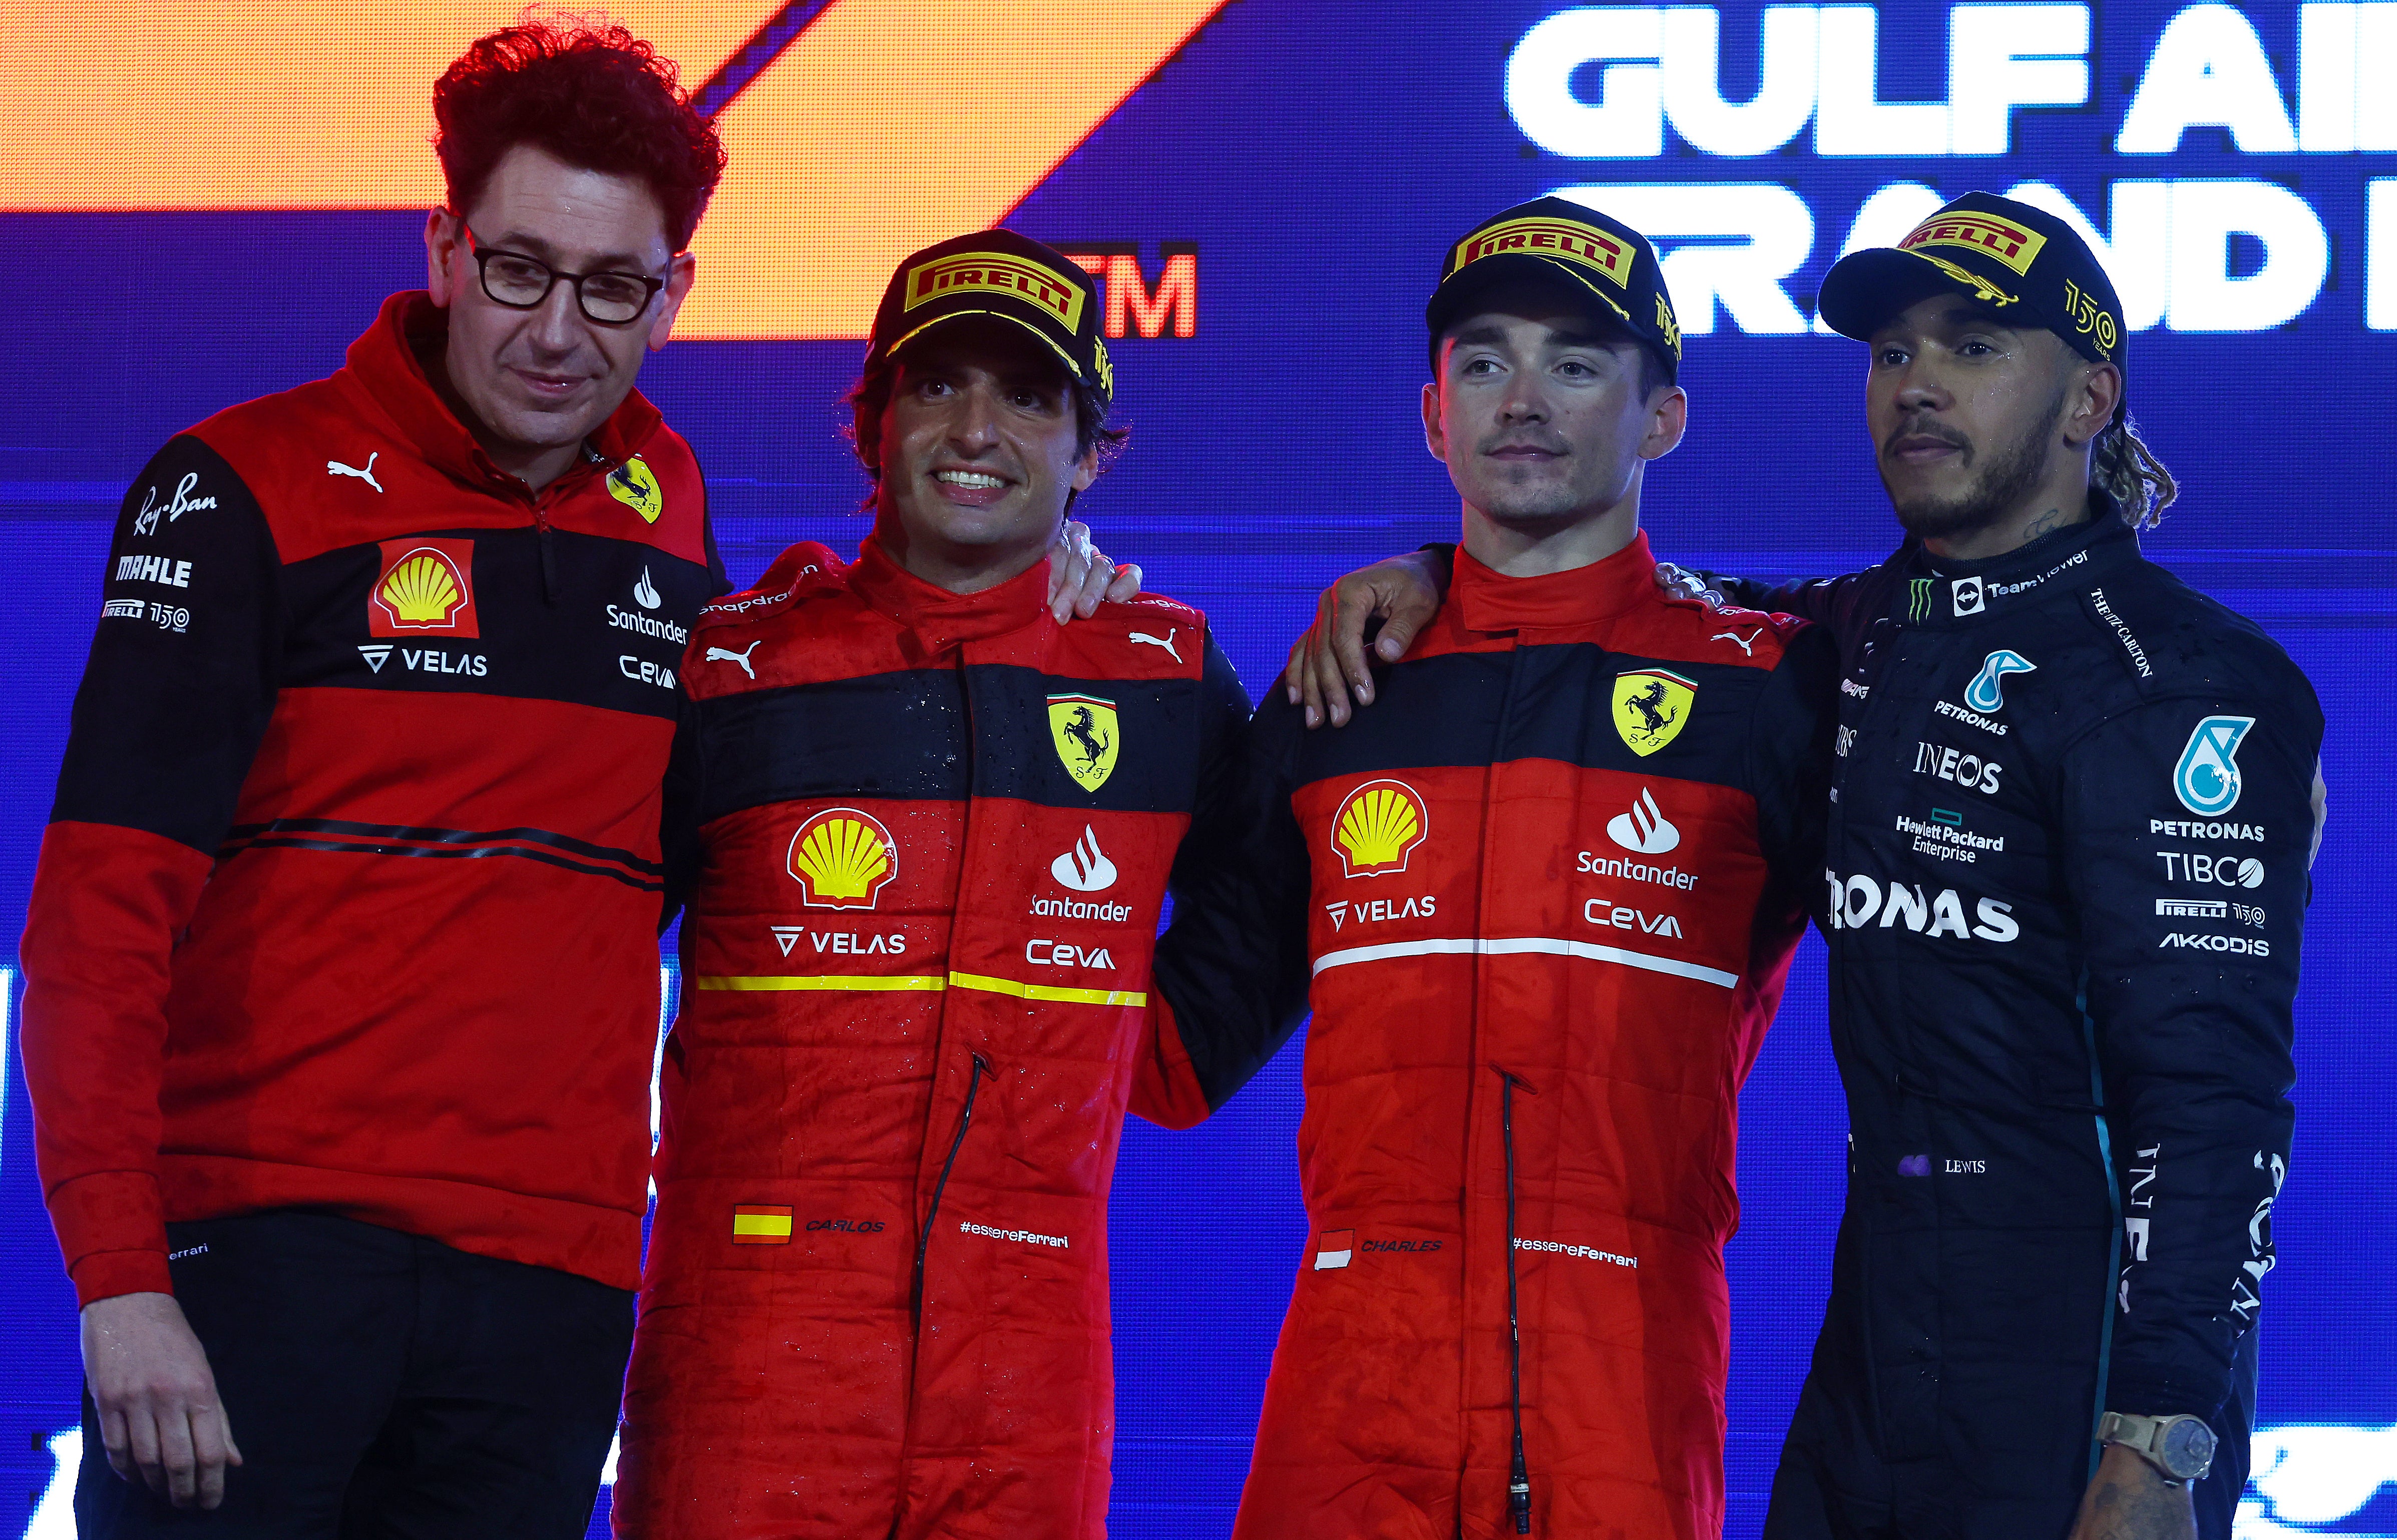 Lewis Hamilton couldn’t compete with the pace of the Ferraris in Bahrain